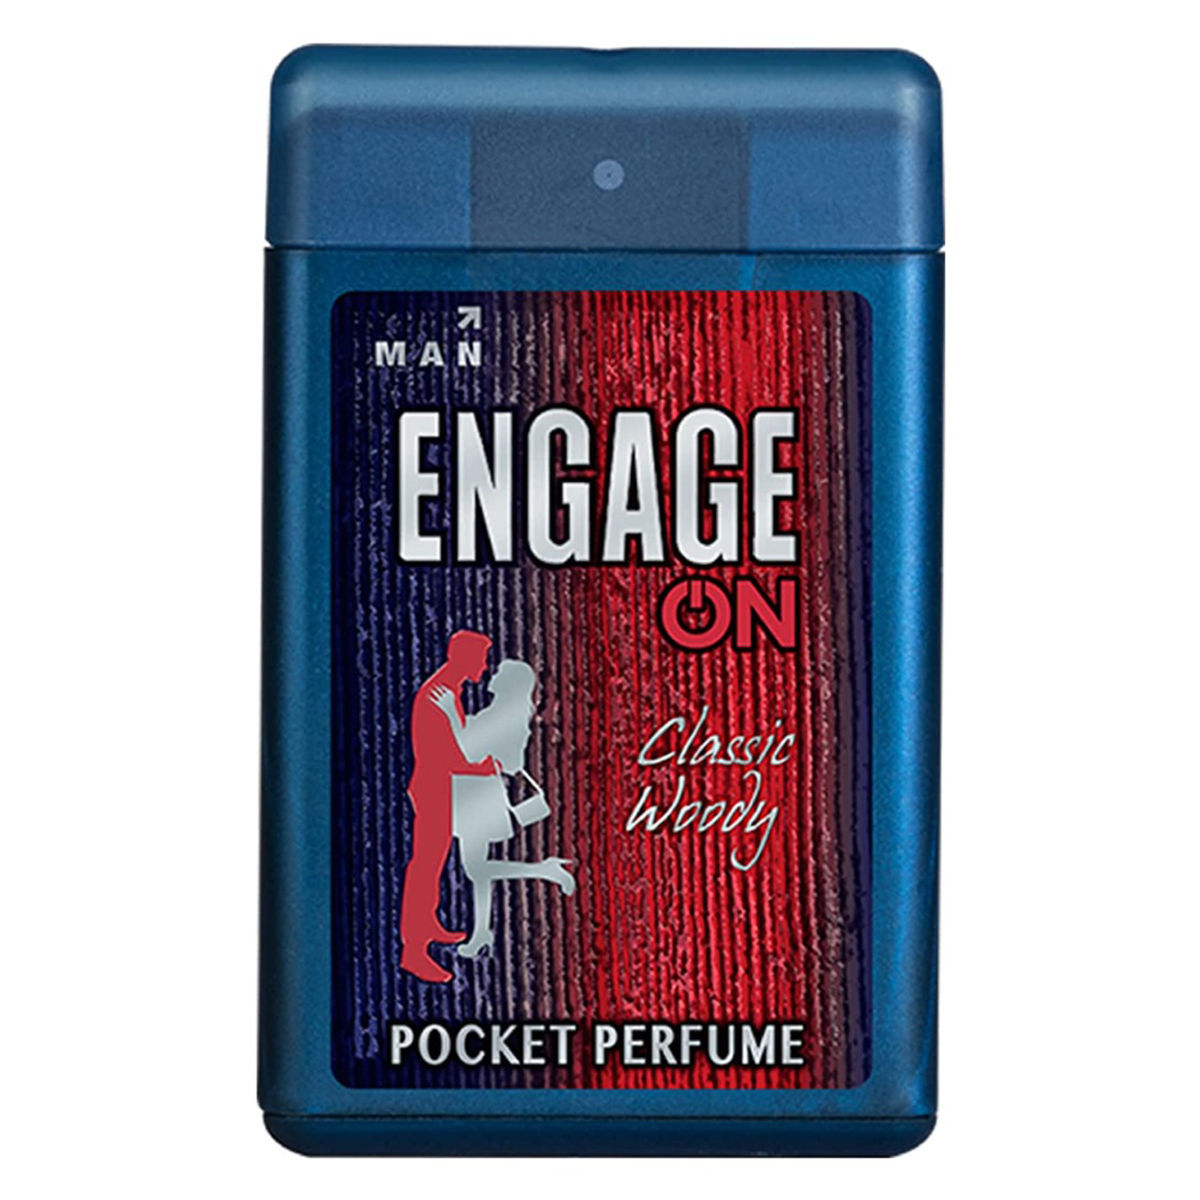 Buy Engage On Classic Woody Pocket Perfume for Men, 18 ml Online